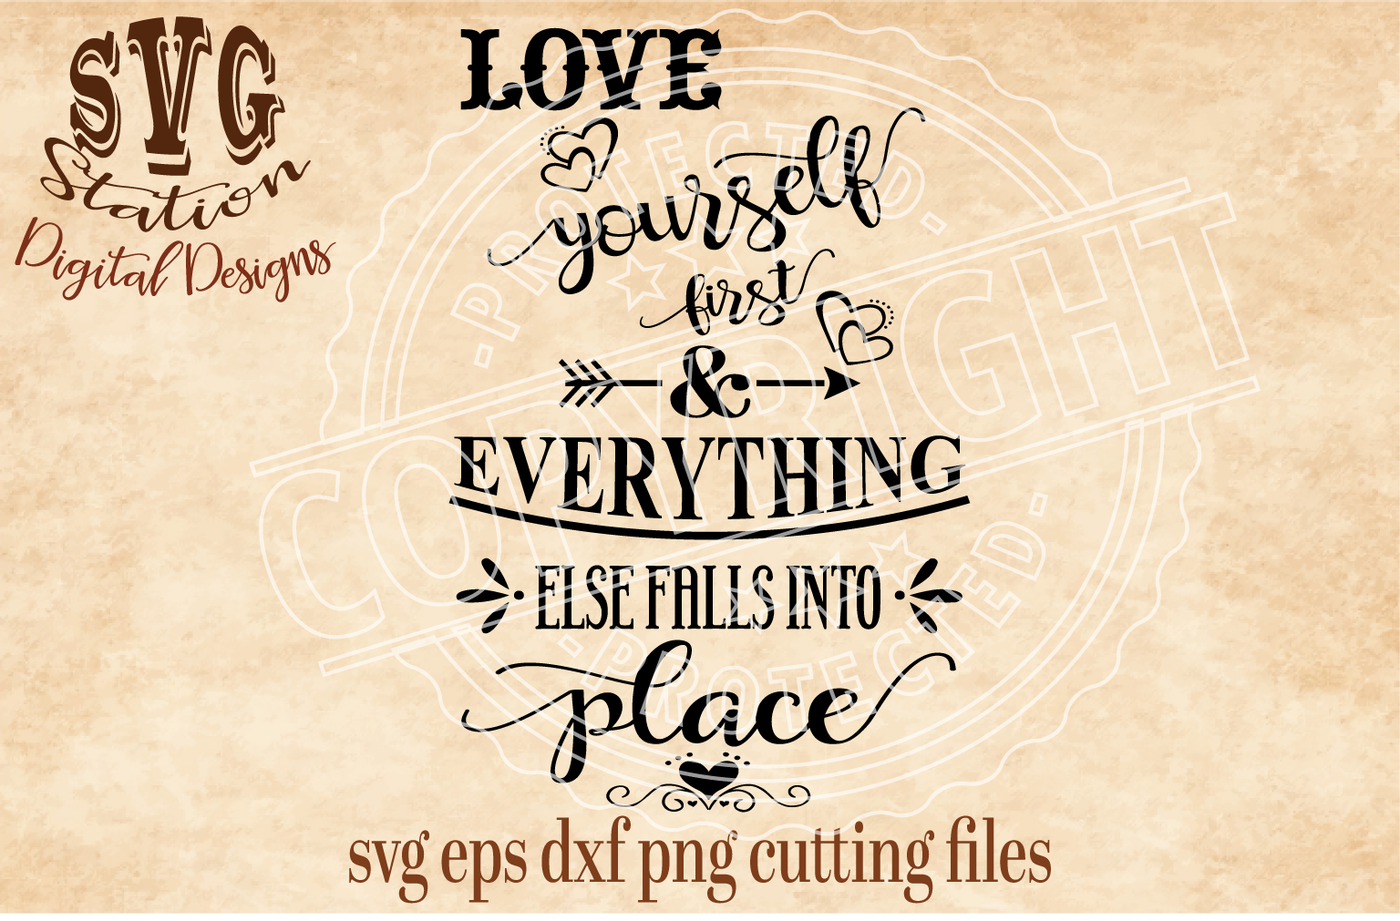 Download Love Yourself First And Everything Else Falls Into Place Svg Dxf Png Eps Cutting File Silhouette Cricut By Svg Station Thehungryjpeg Com